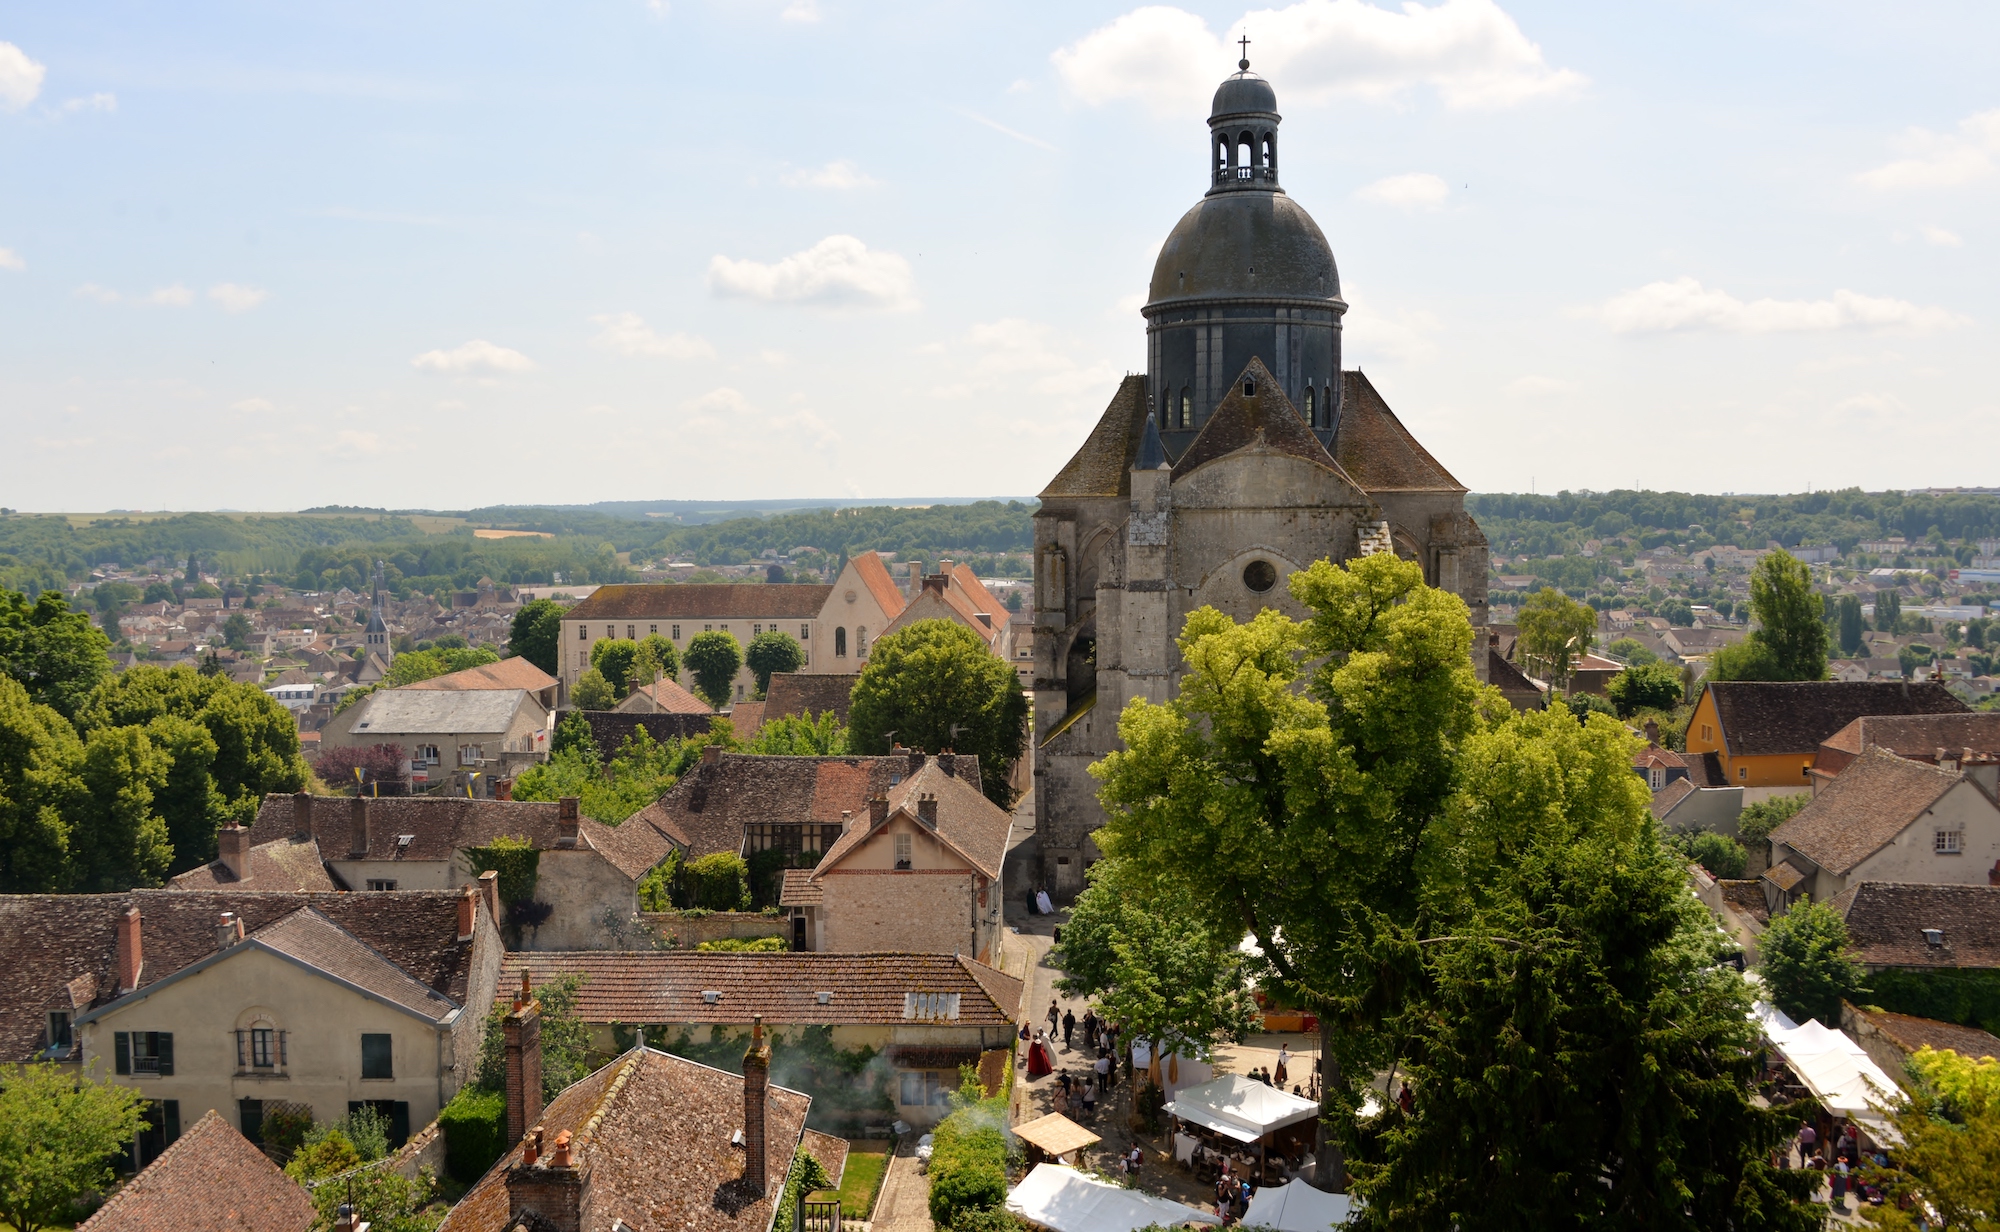 A brief history of Provins